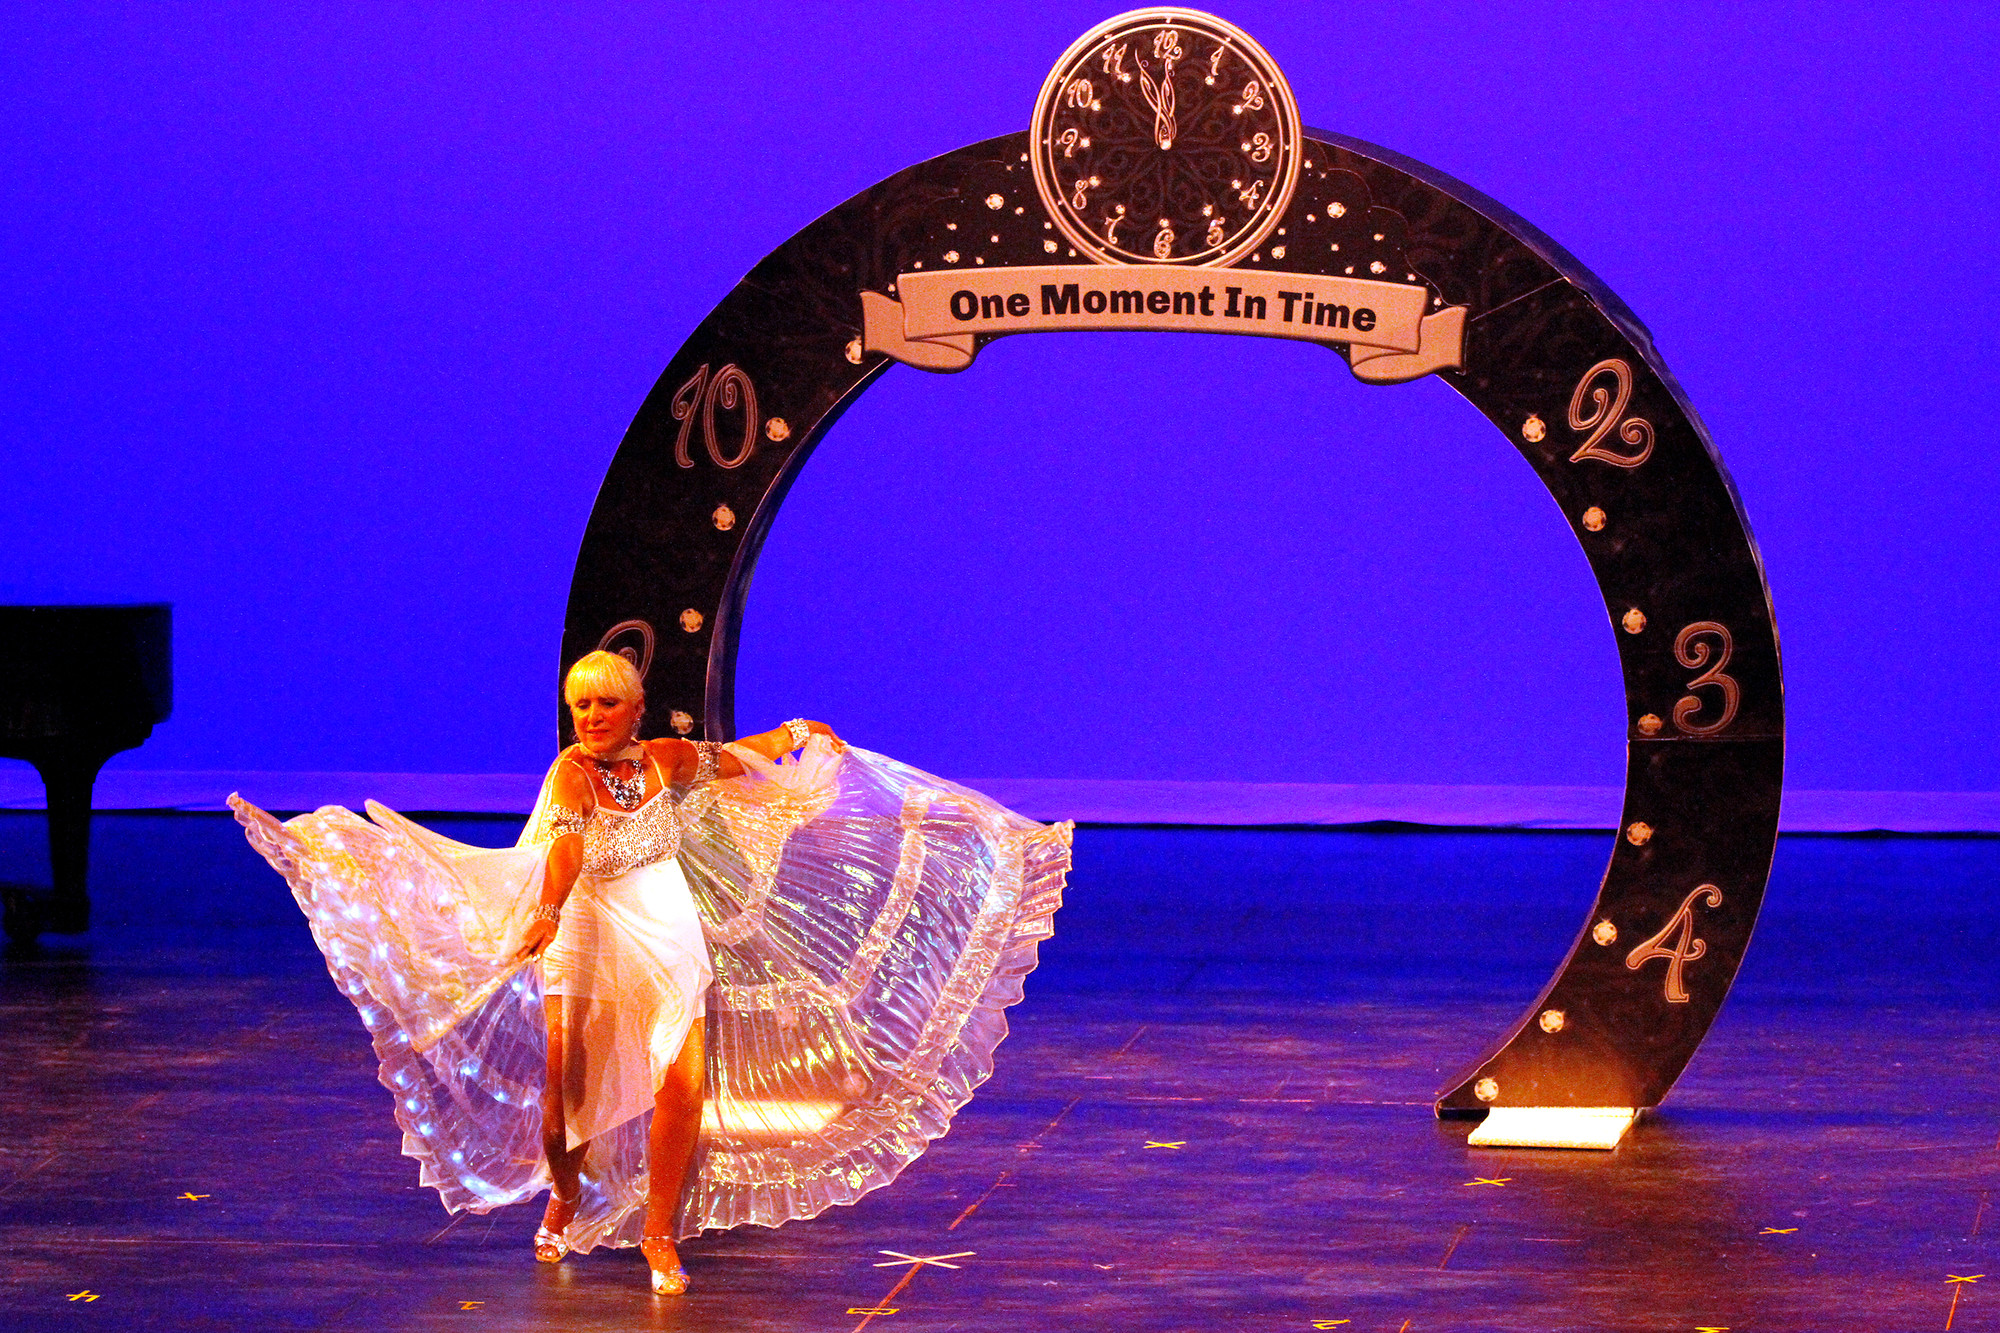 Marie, a longtime dancer, wowed the crowd at Hofstra University with her performance.